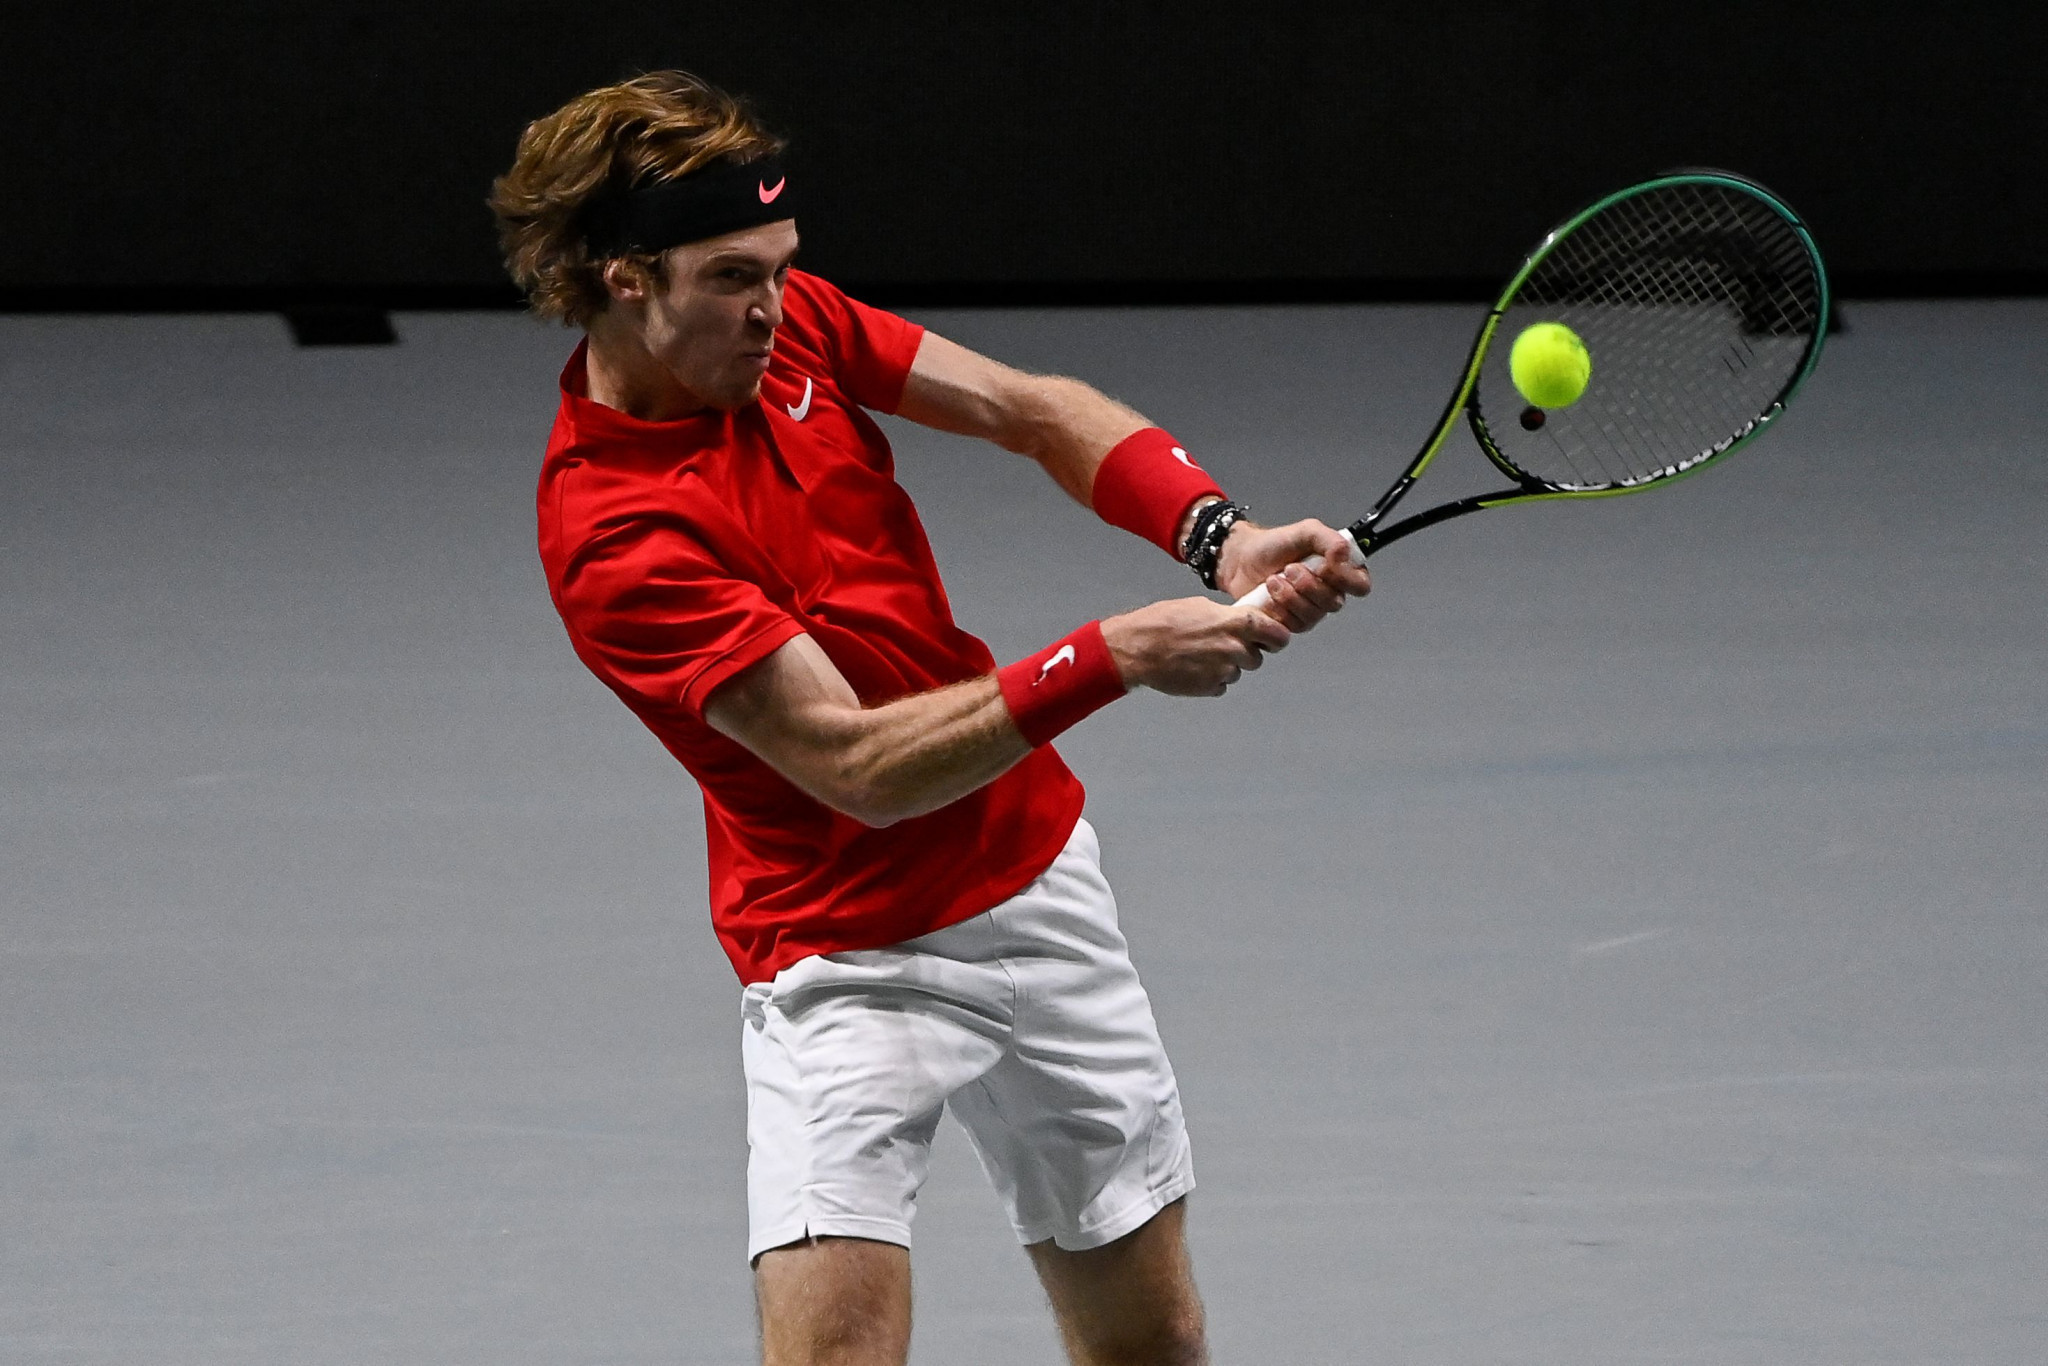 Rublev tests positive for COVID-19 three weeks out from Australian Open